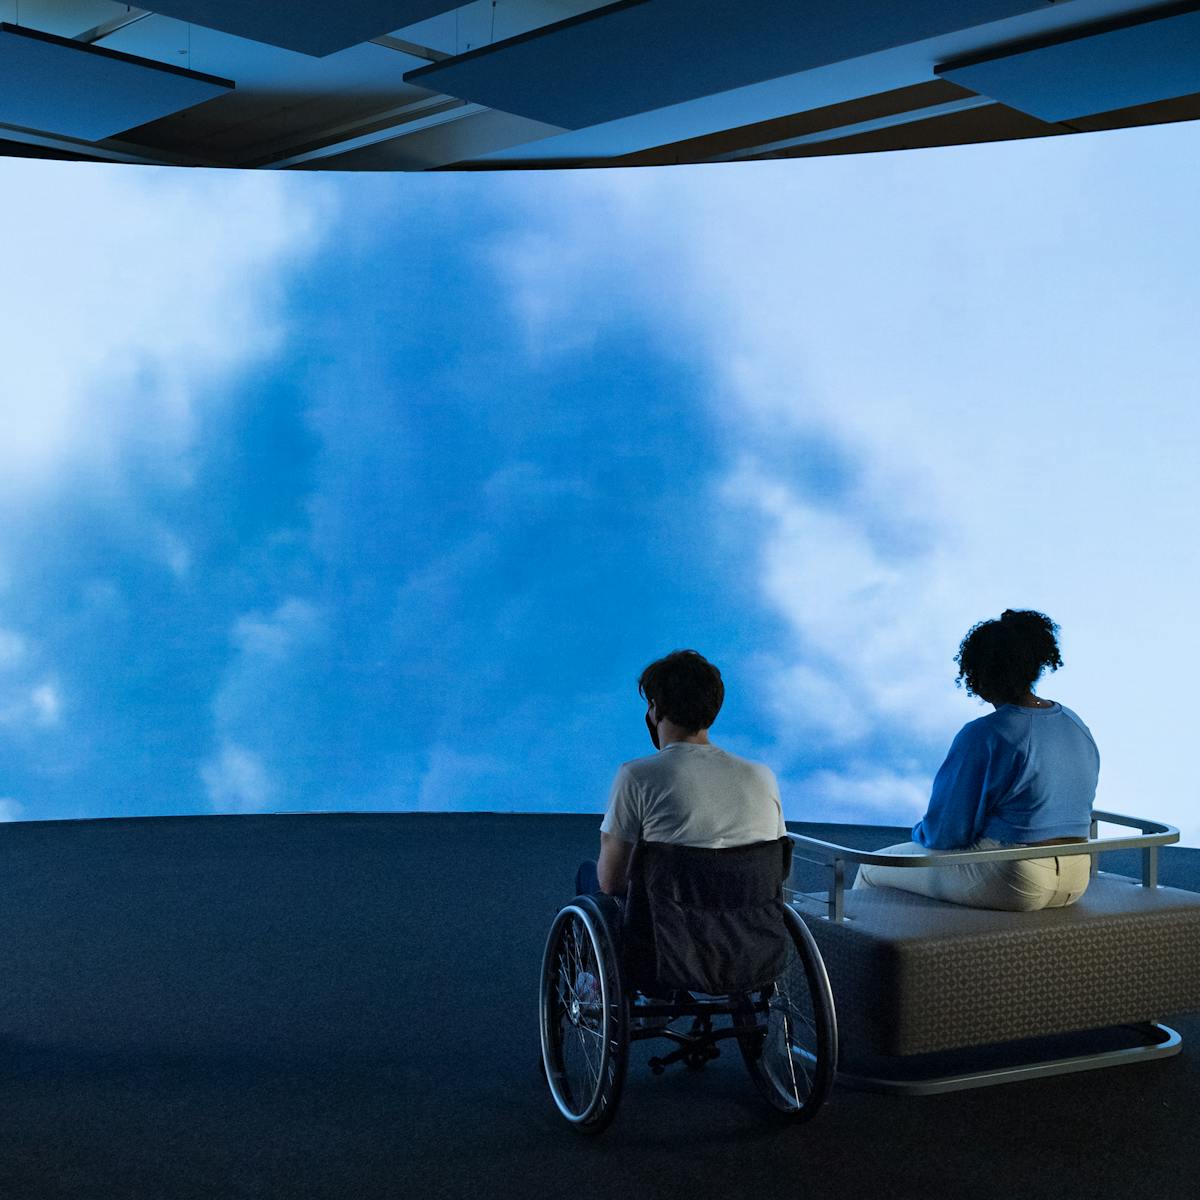 Colour photograph of three people watching a very large, curved screen. The young man on the left is standing up with his hands behind his back. The young man in the middle is in a wheelchair, to the right of a girl who is sat on a chair. On the screen is a scene showing blue sky and white clouds.